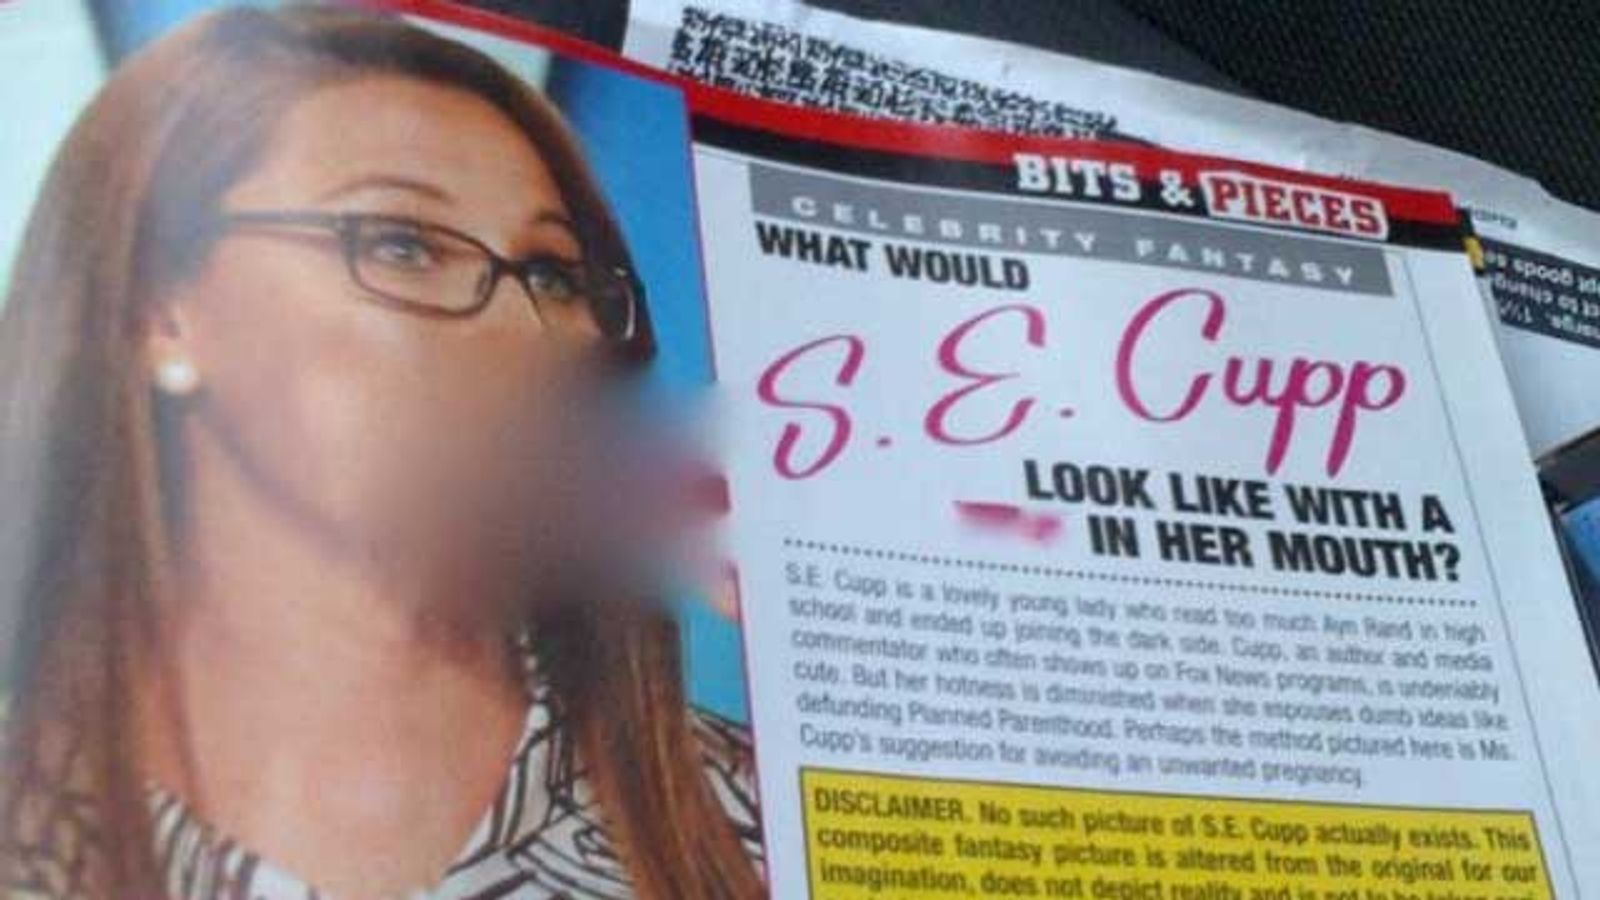 S.E. Cupp 'Dick in Mouth' Image Brings Left & Right Together